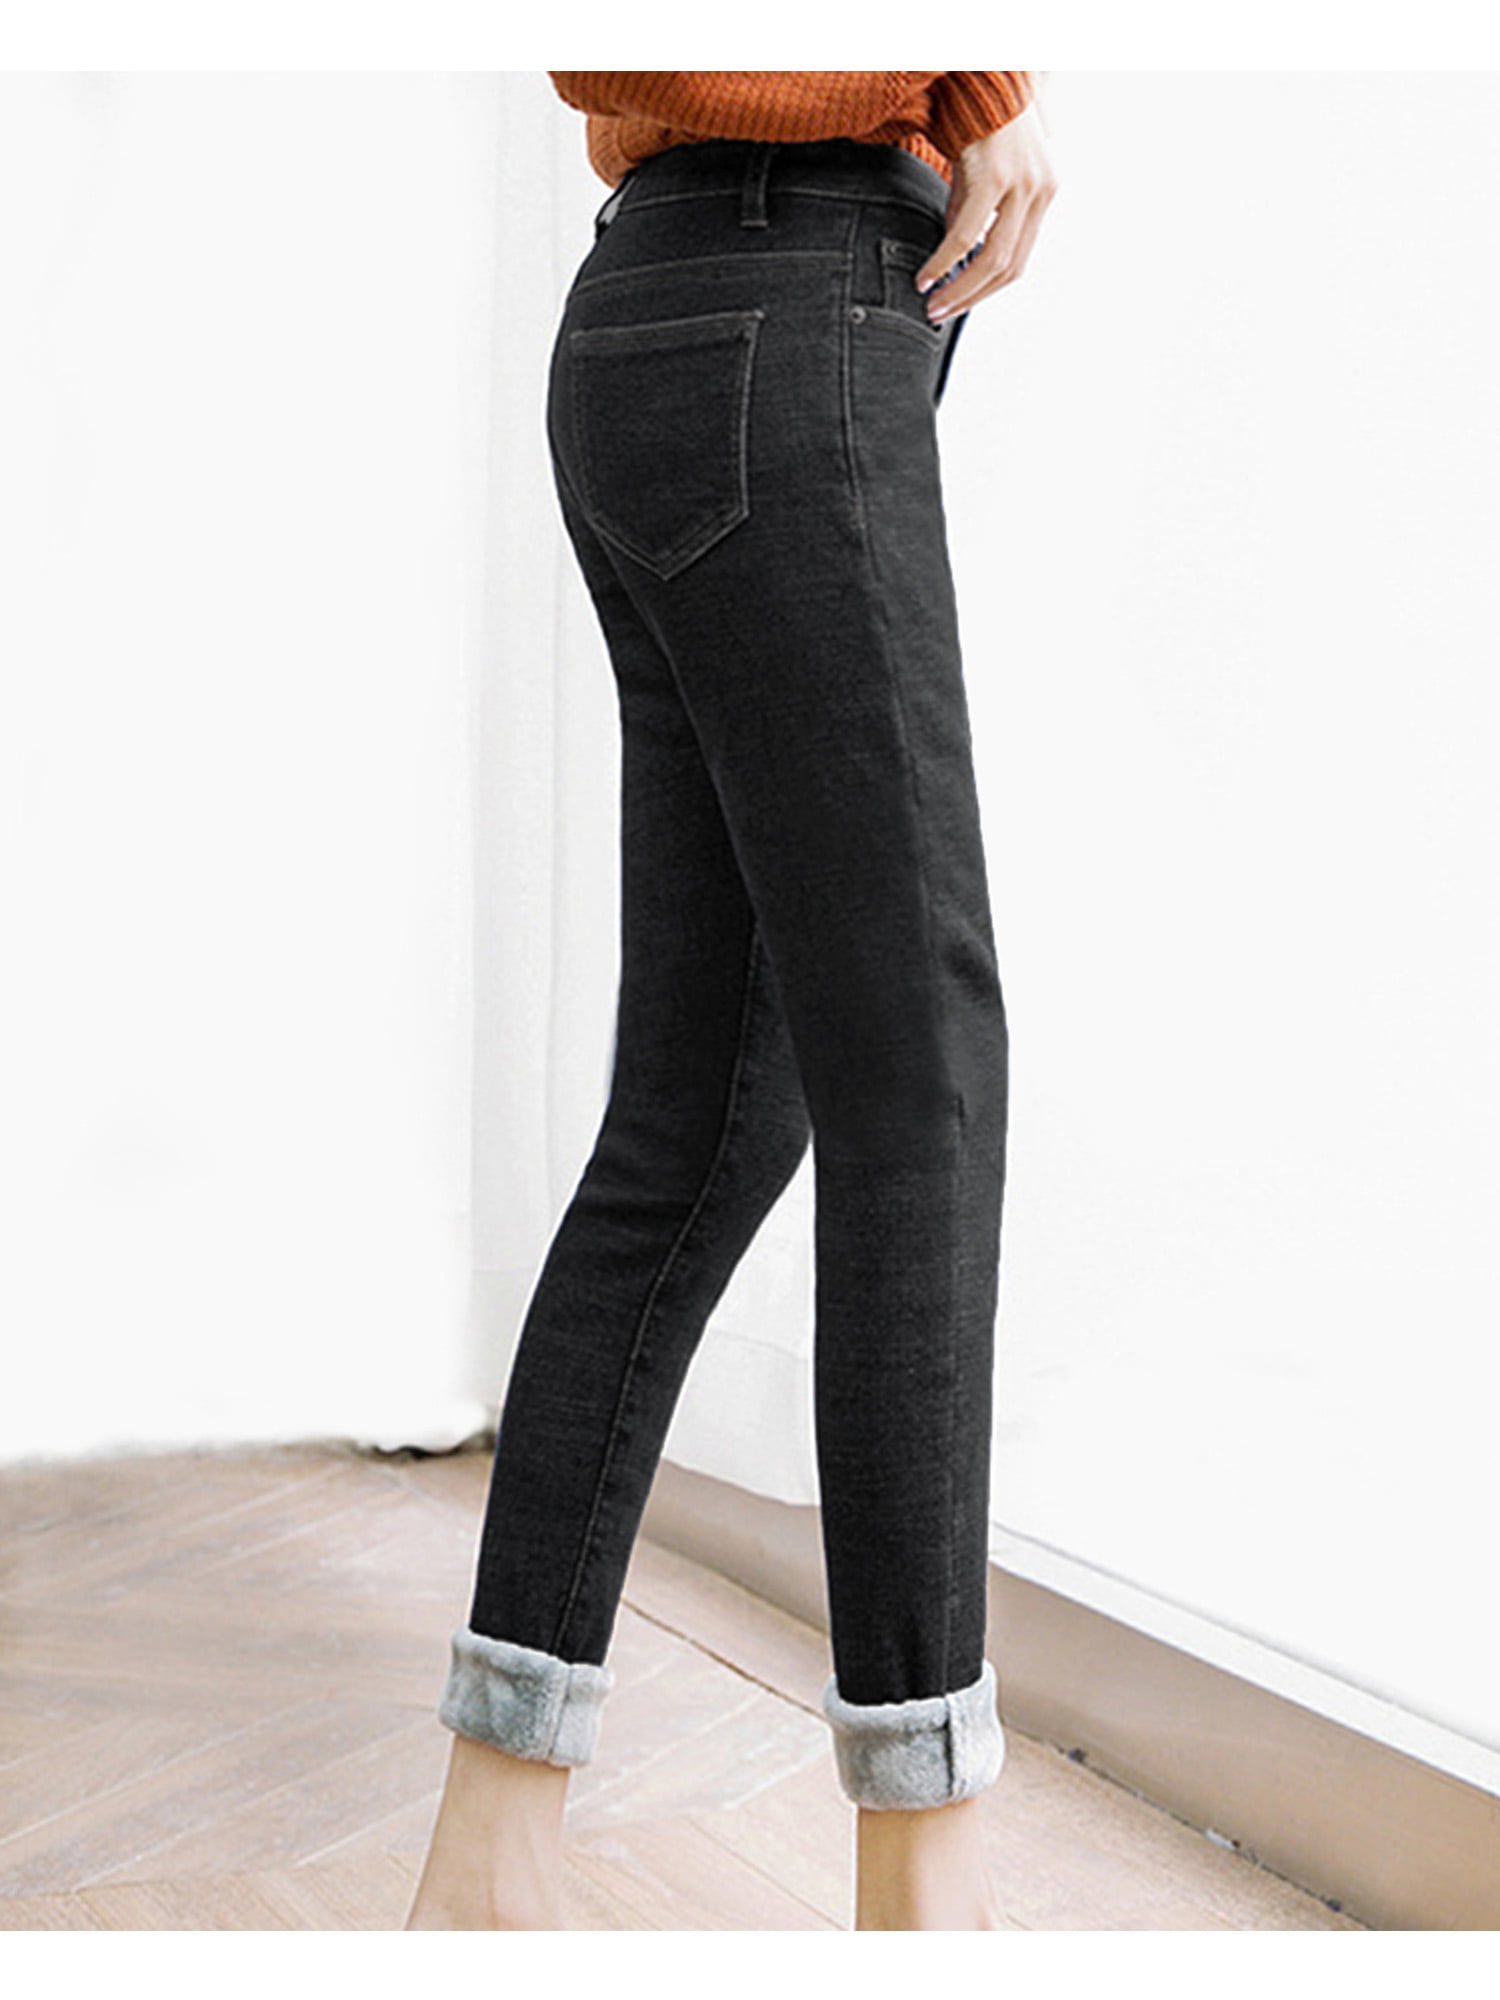 Pisexur Womens Winter Jeans Thick Skinny Pants Fleece Lined Slim Stretch  Warm Jeggings